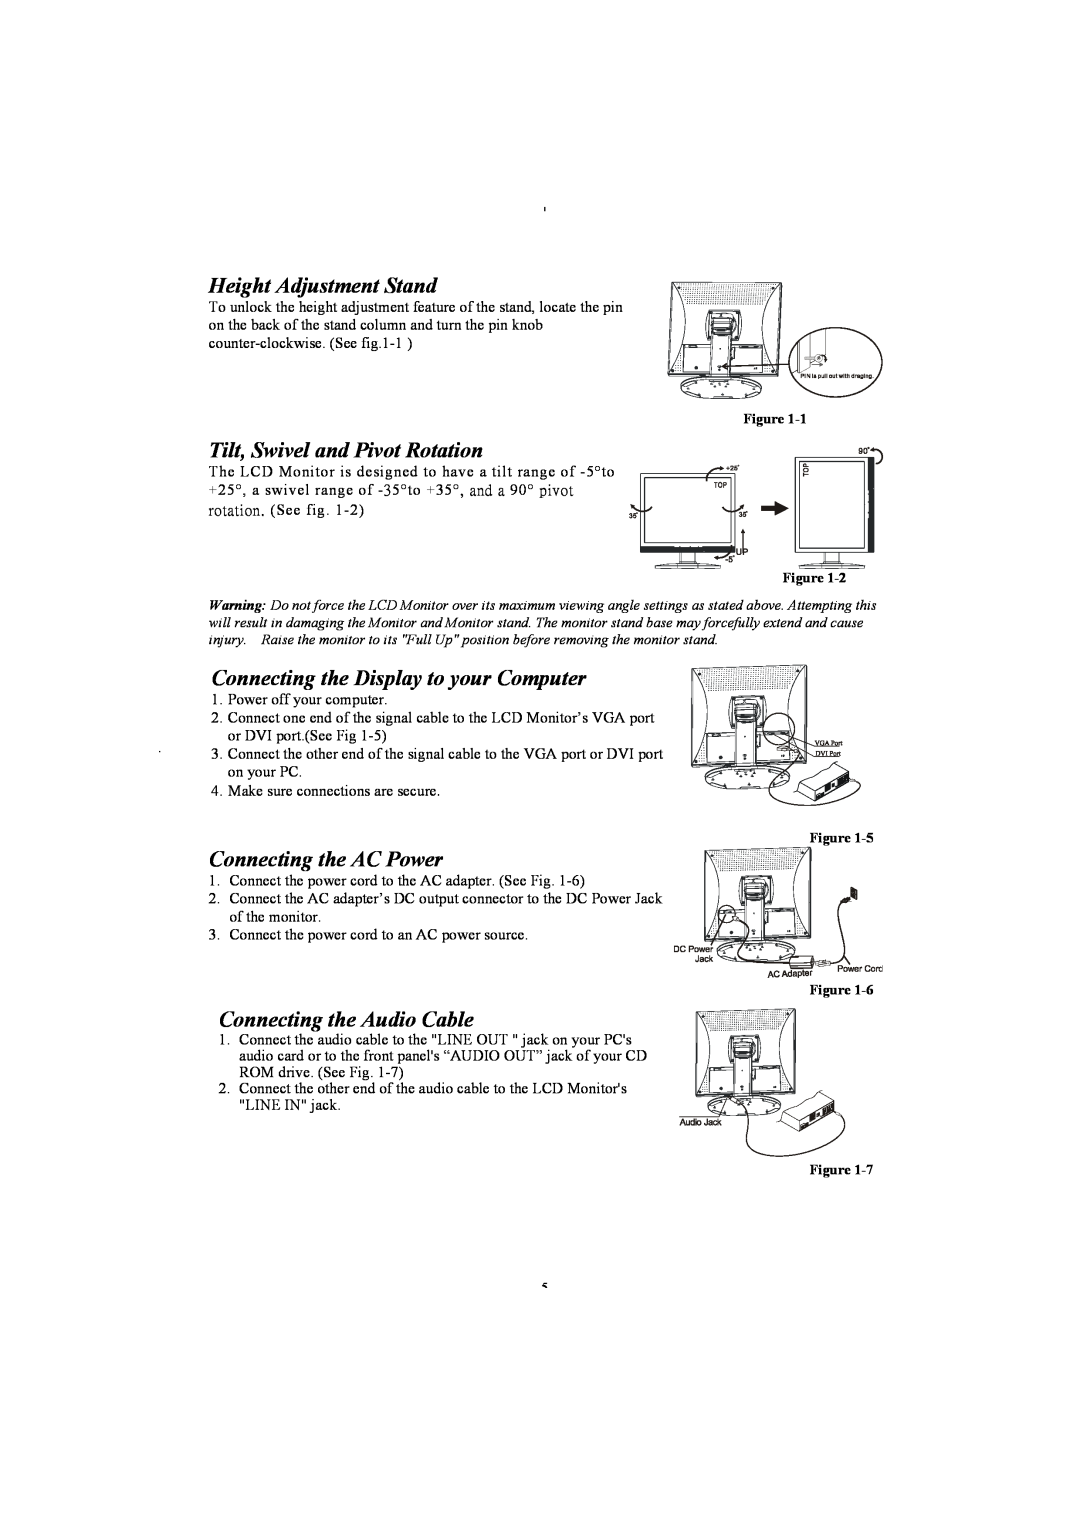 Planar PL2011 manual Height Adjustment Stand, Tilt, Swivel and Pivot Rotation, Connecting the Display to your Computer 